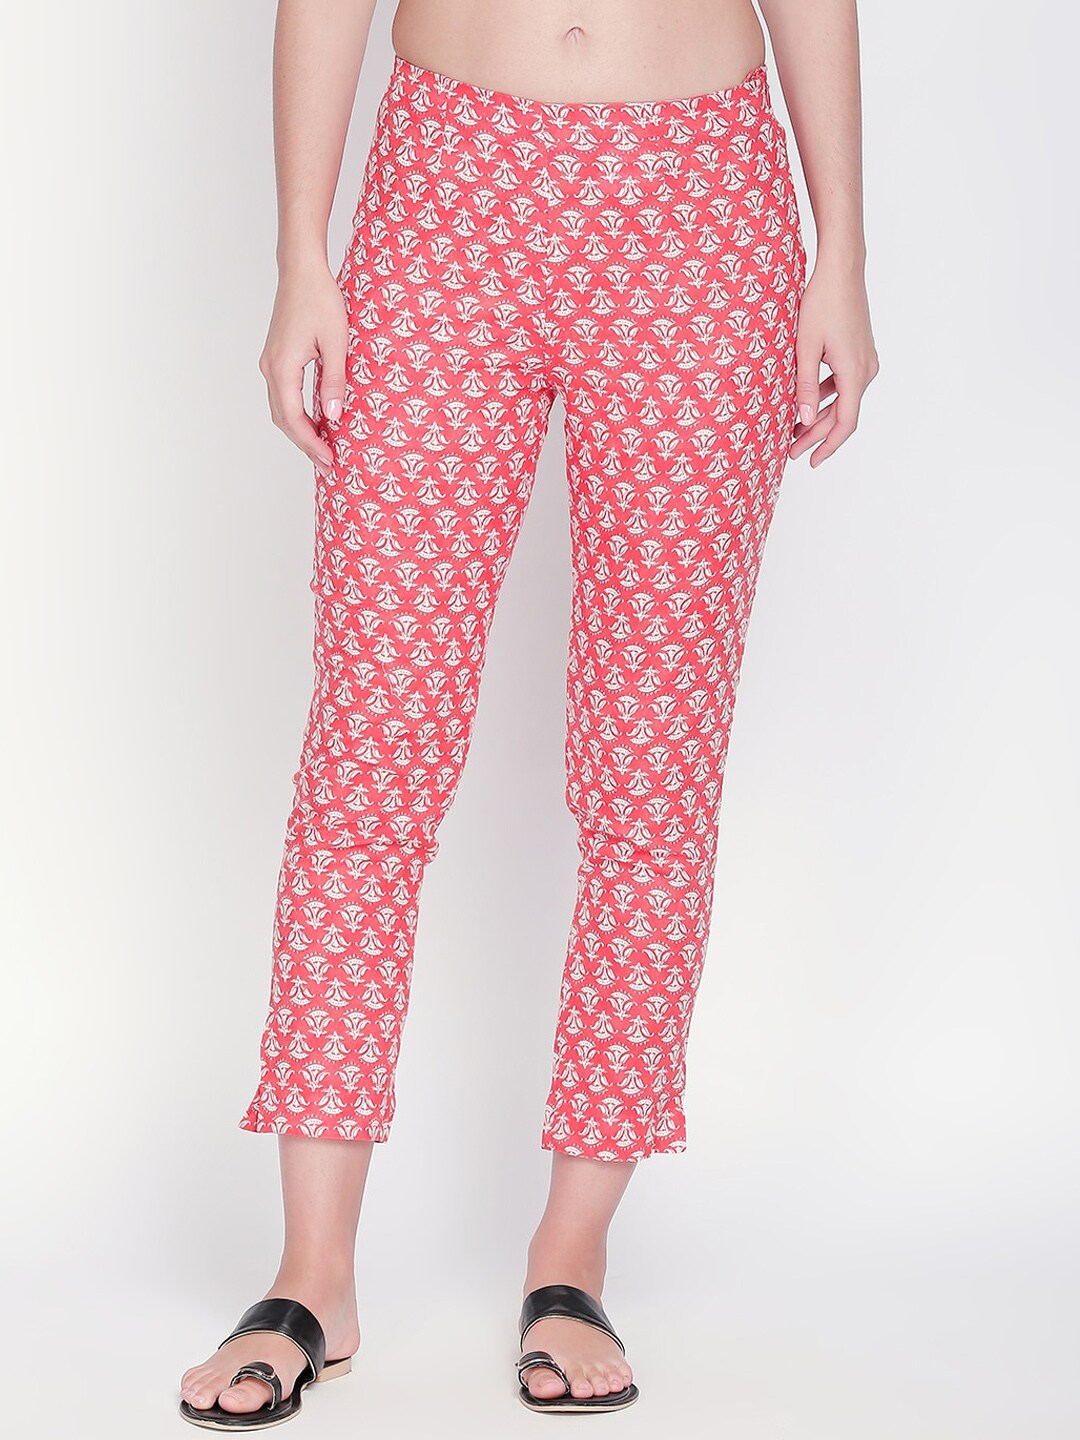 RANGMANCH BY PANTALOONS Women Peach-Coloured & Off-White Slim Fit Printed Regular Trousers Price in India